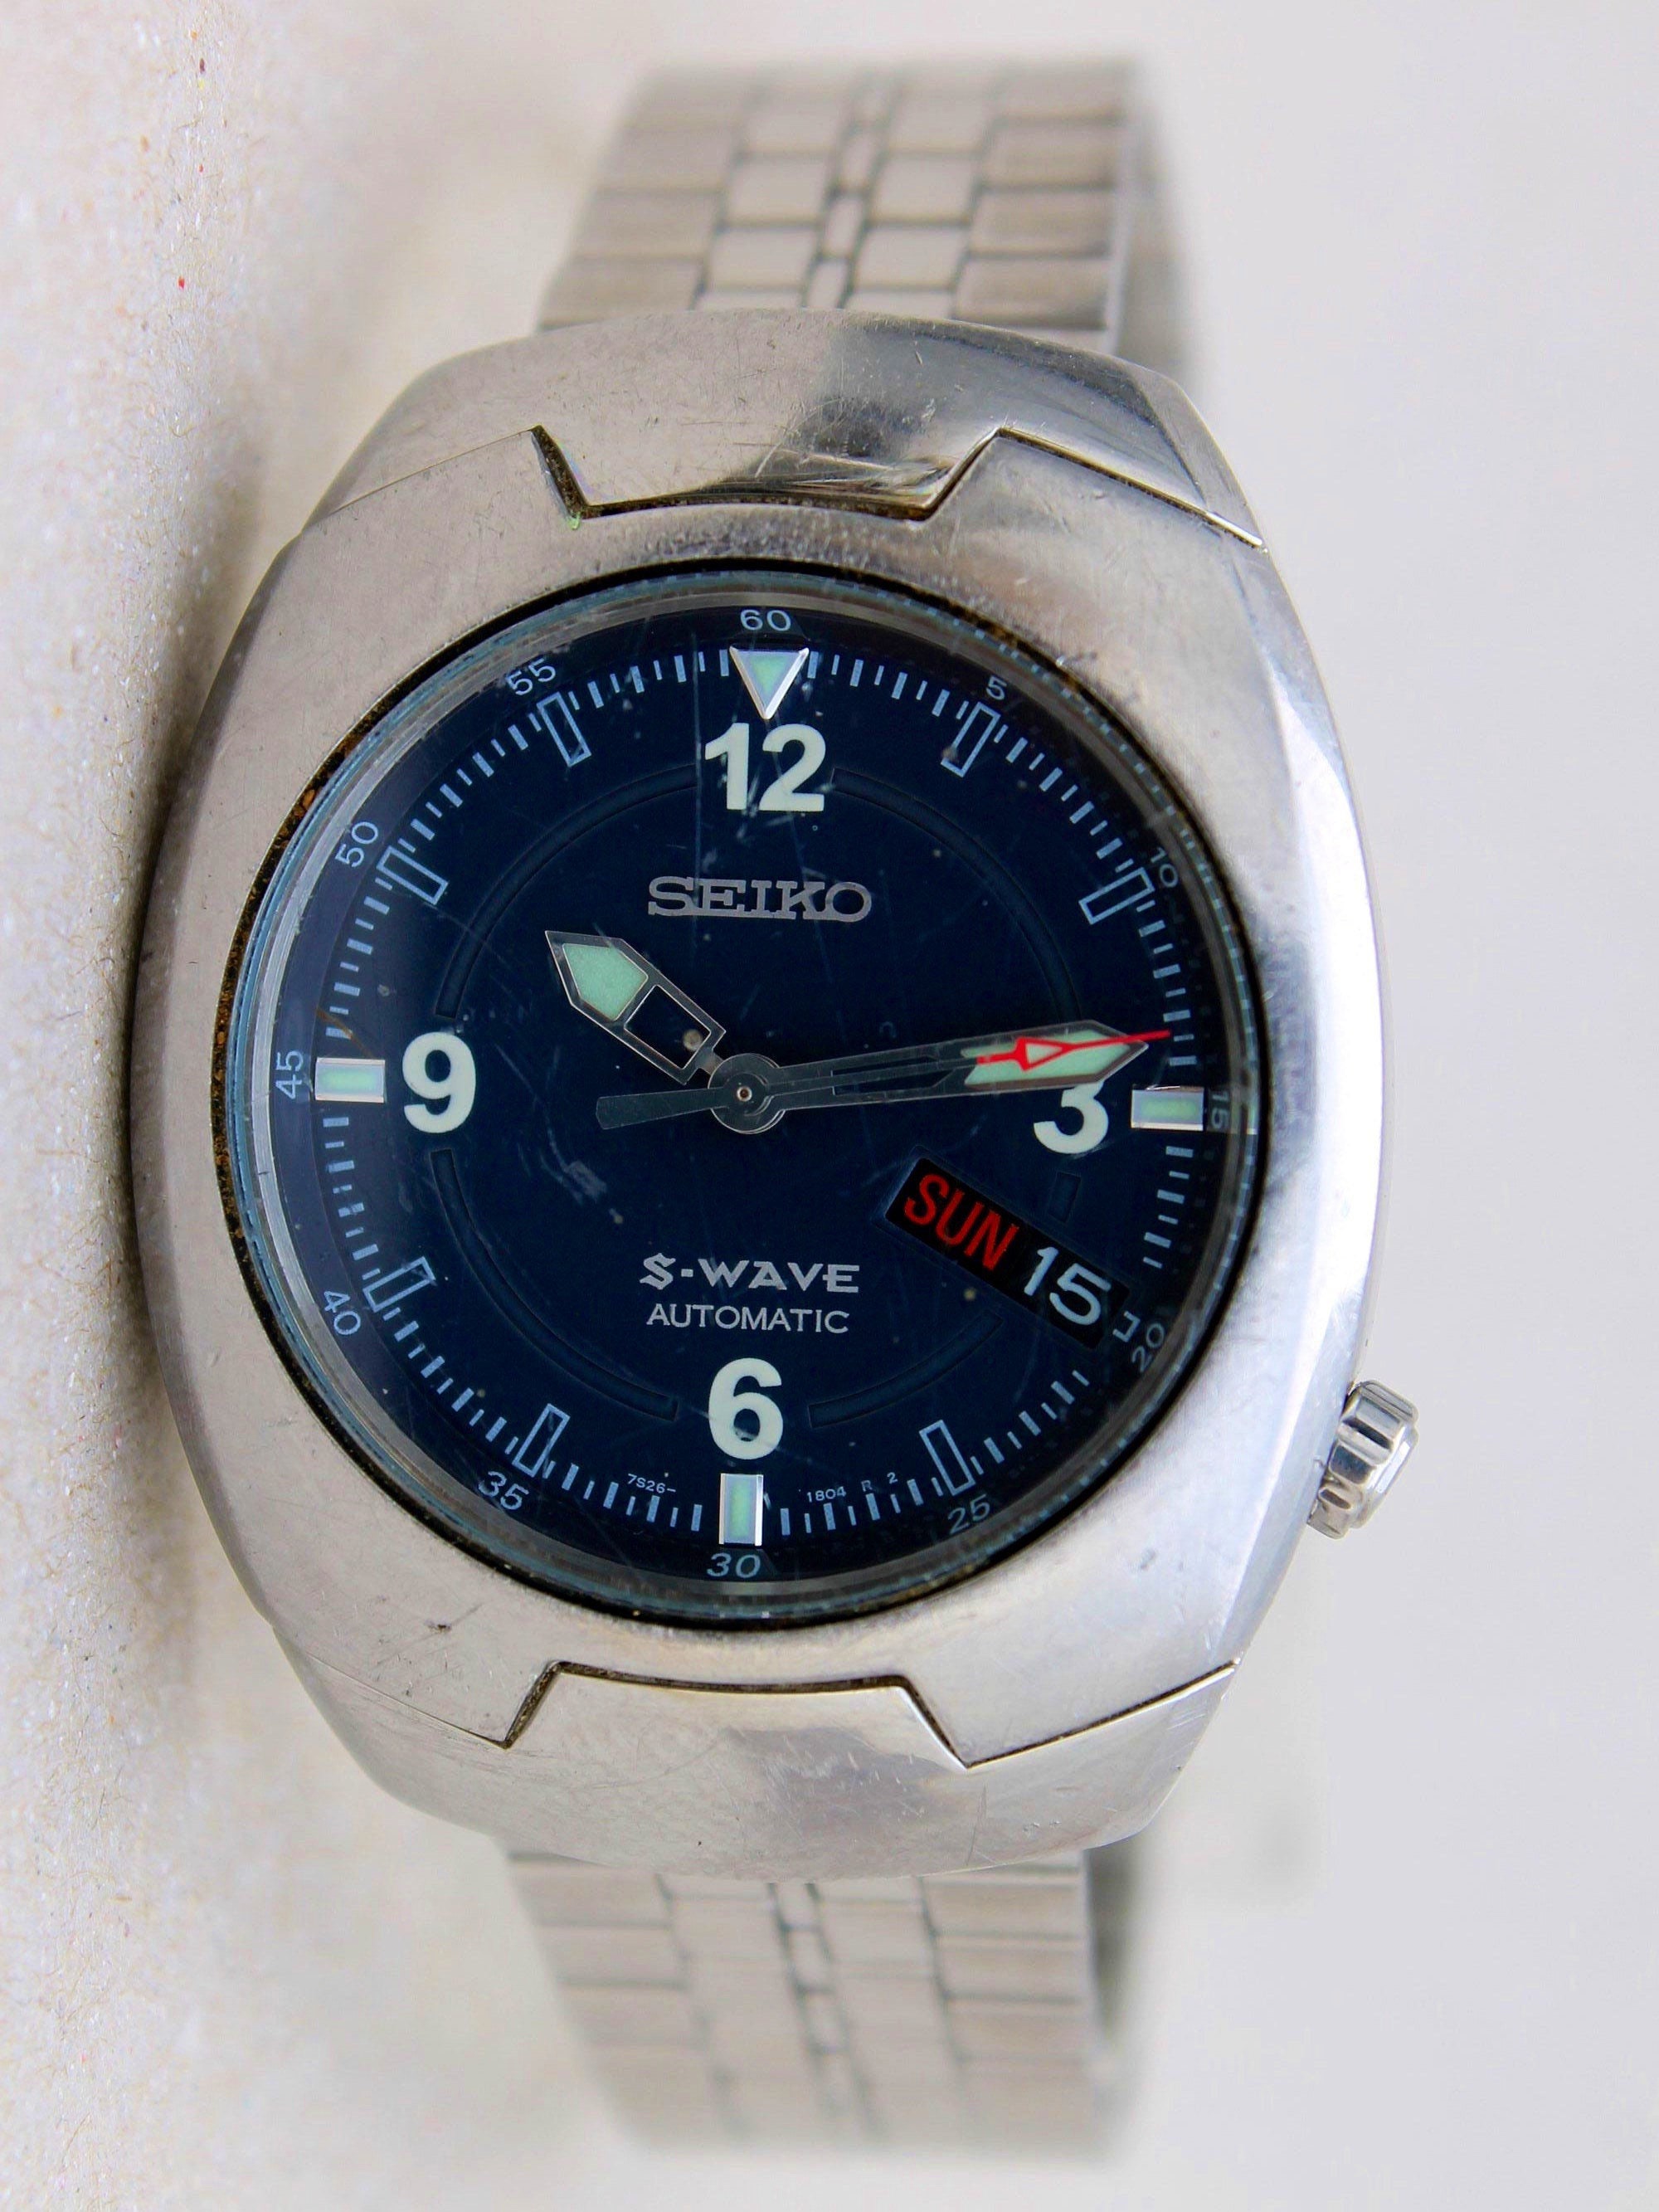 SEIKO S-WAVE Automatic Mens Wristwatch Day Date Blue Dial - Etsy UK